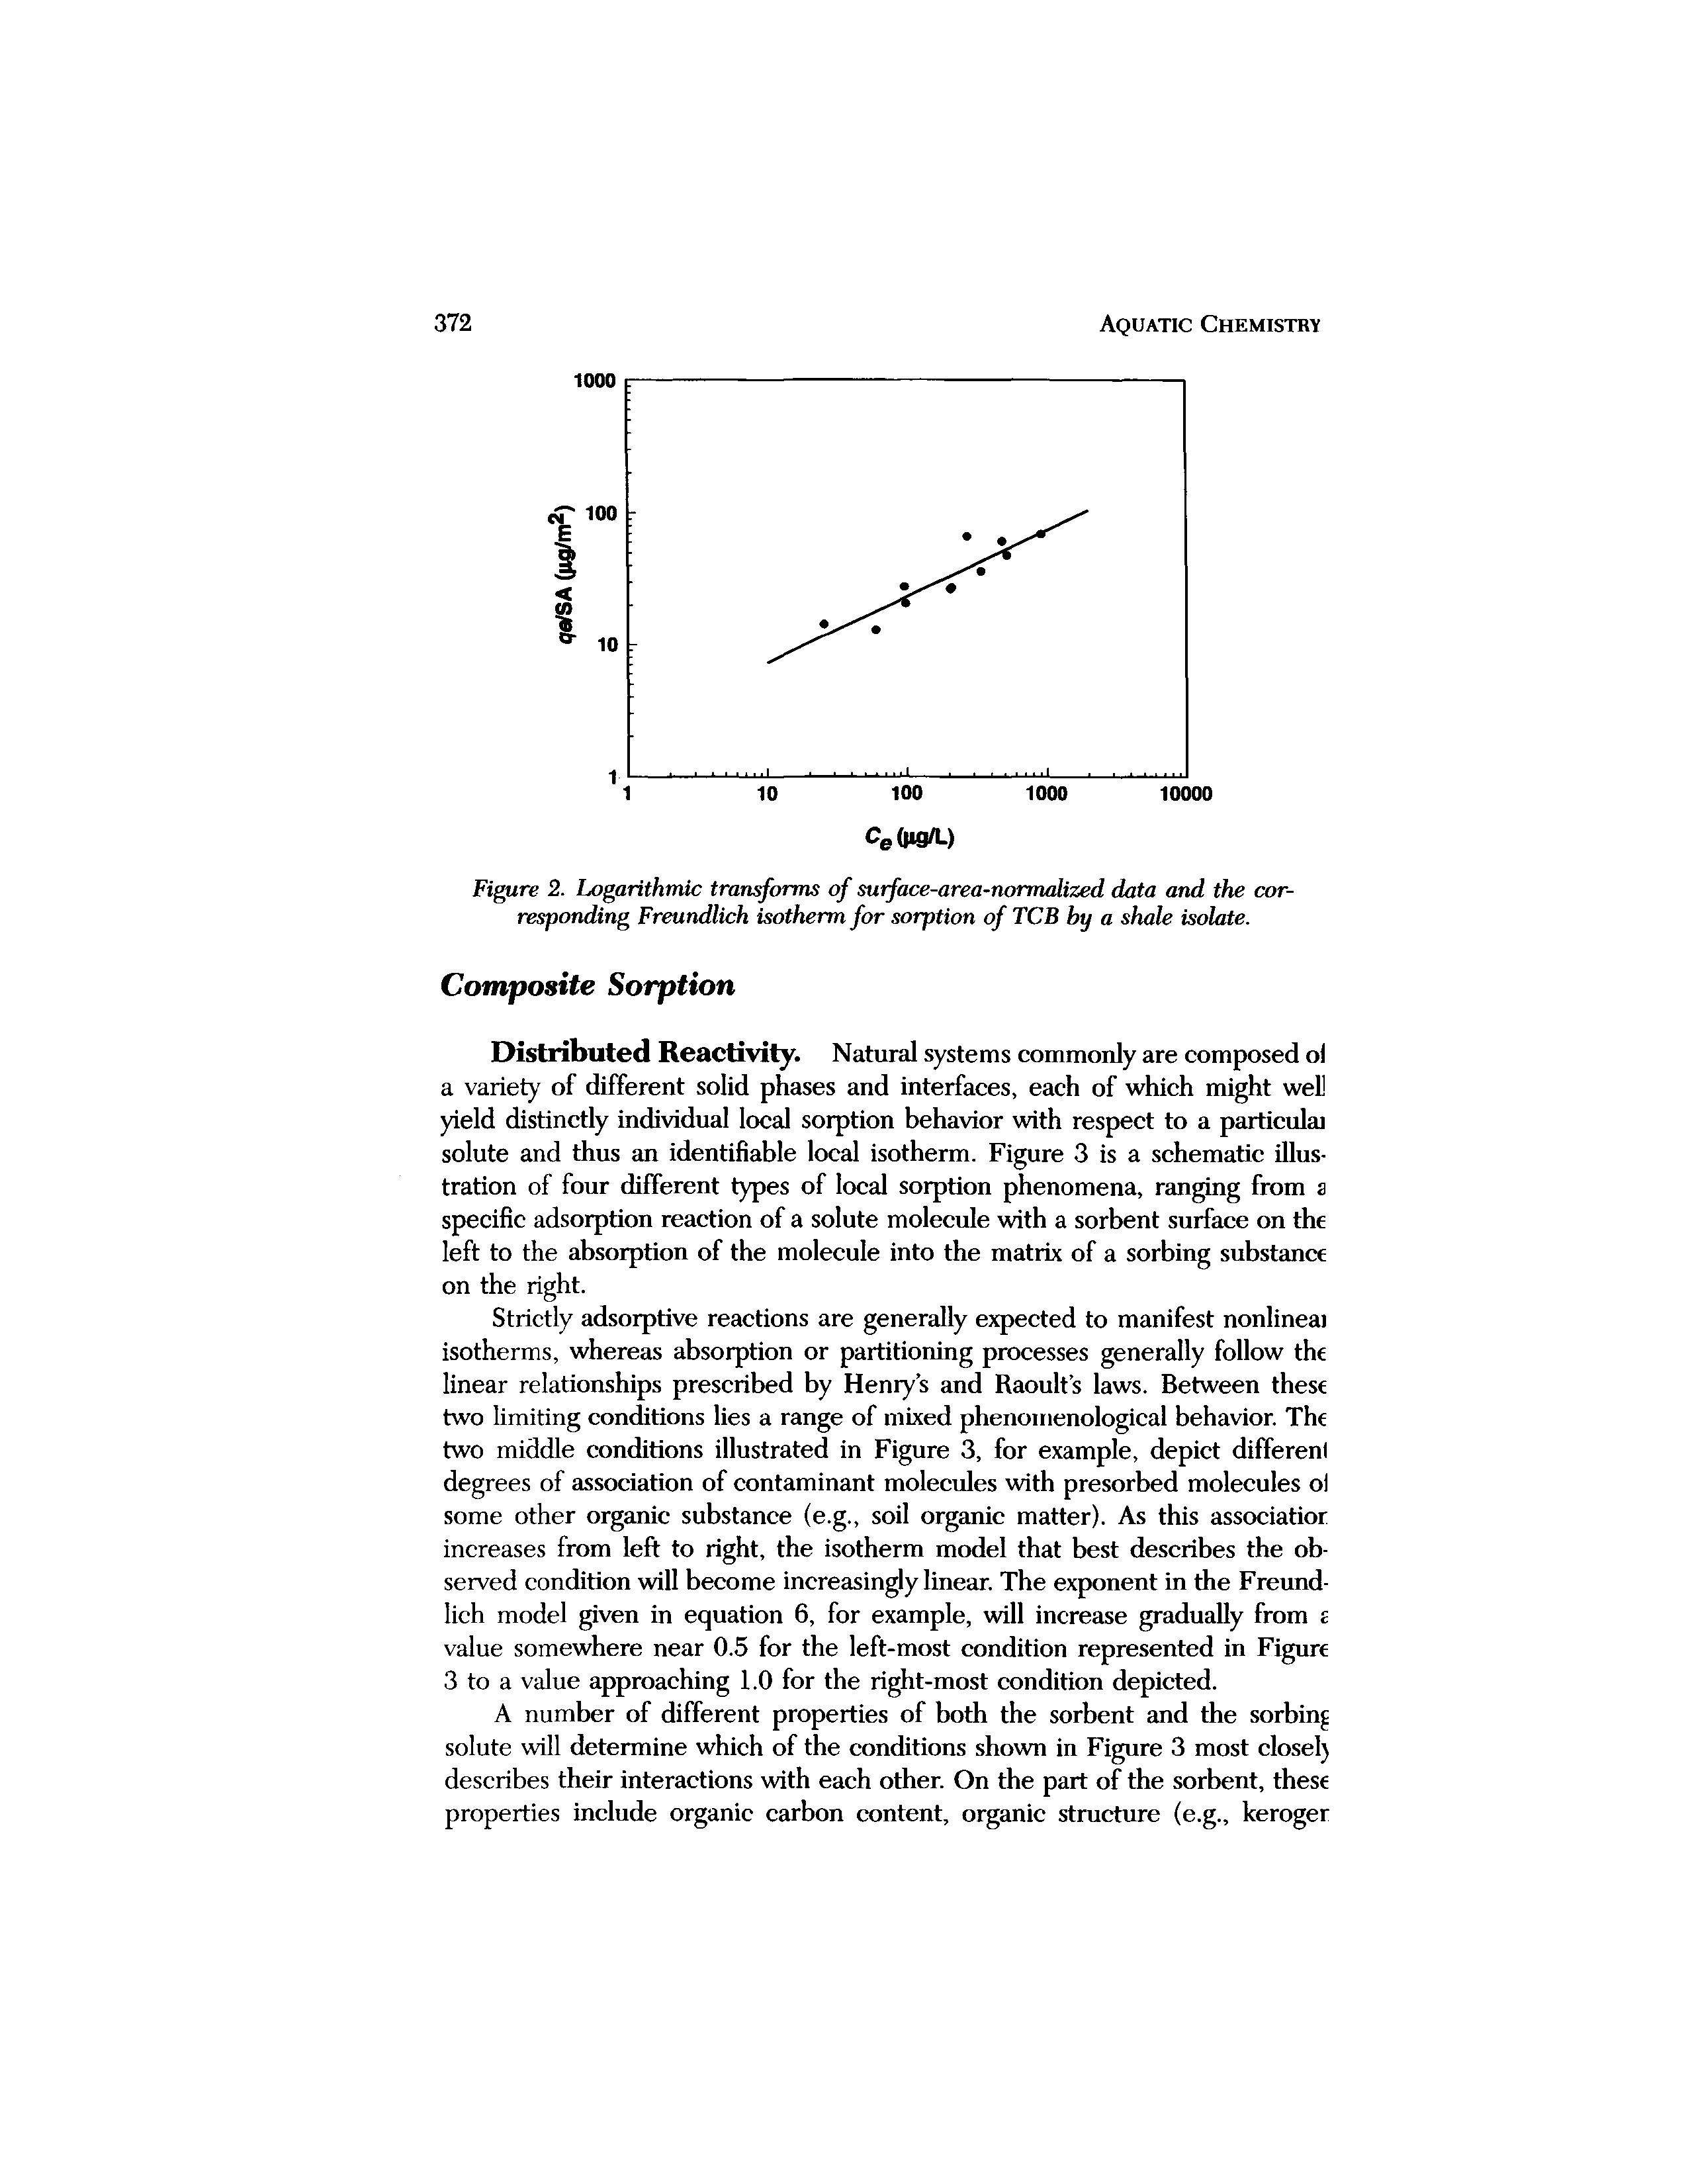 Figure 2. Logarithmic transforms of surface-area-normalized data and the corresponding Freundlich isotherm for sorption of TCB by a shale isolate.